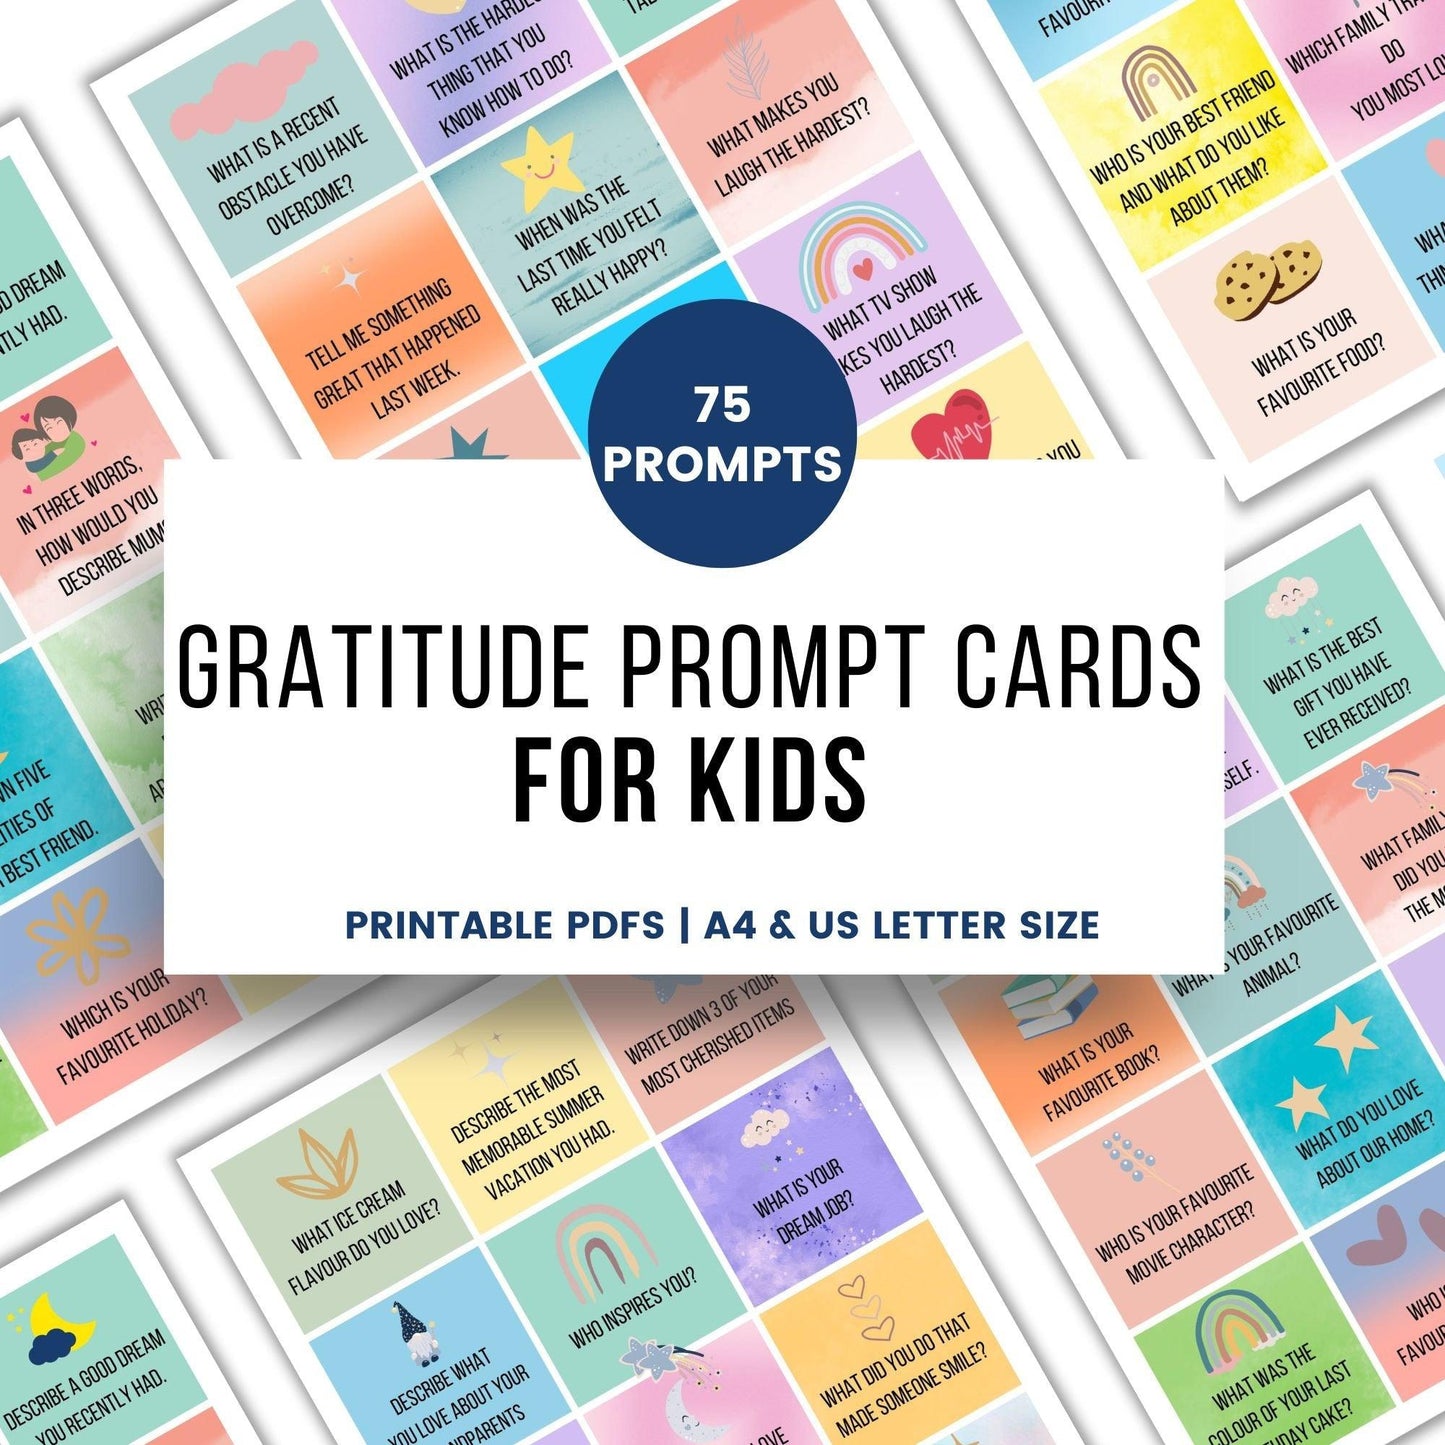 Gratitude Prompt Cards For Kids - Simplify Create Inspire